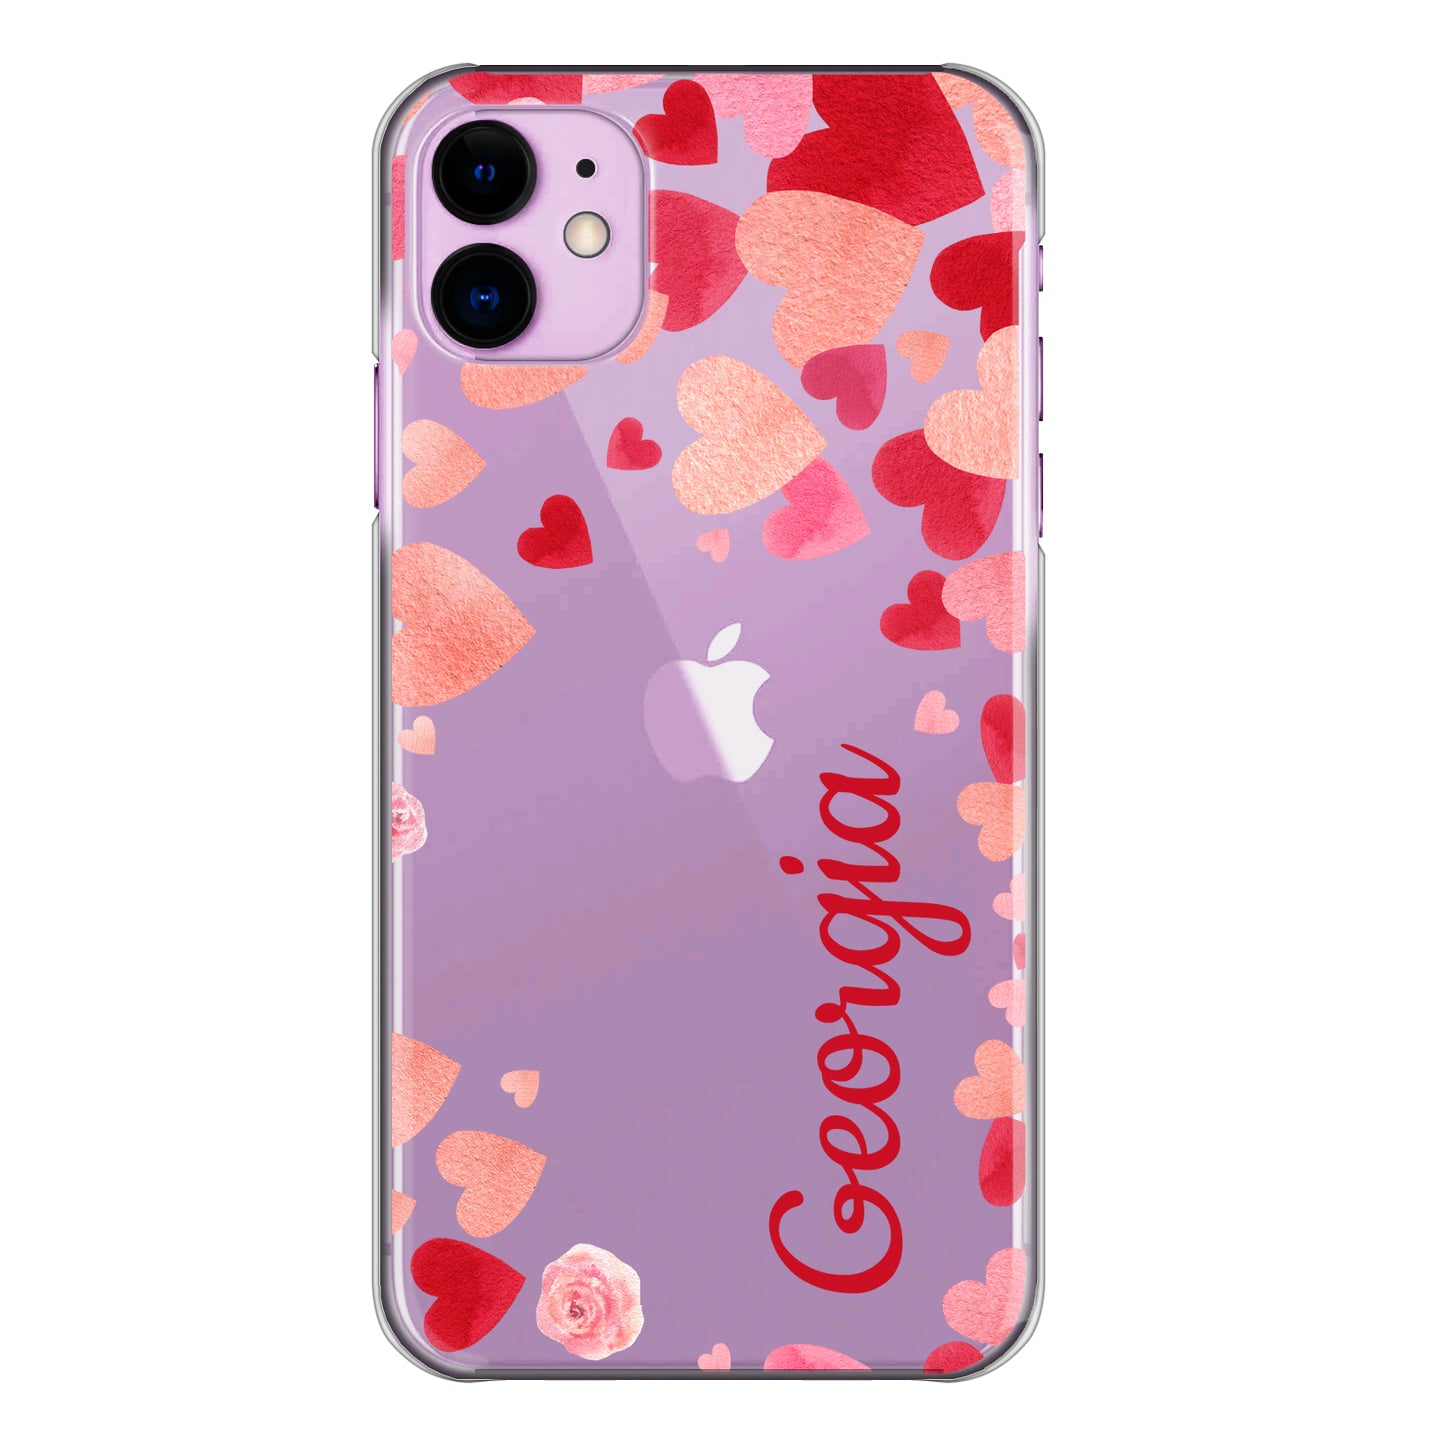 Personalised Nokia Phone Hard Case with Hearts/Roses and Stylish Red Text